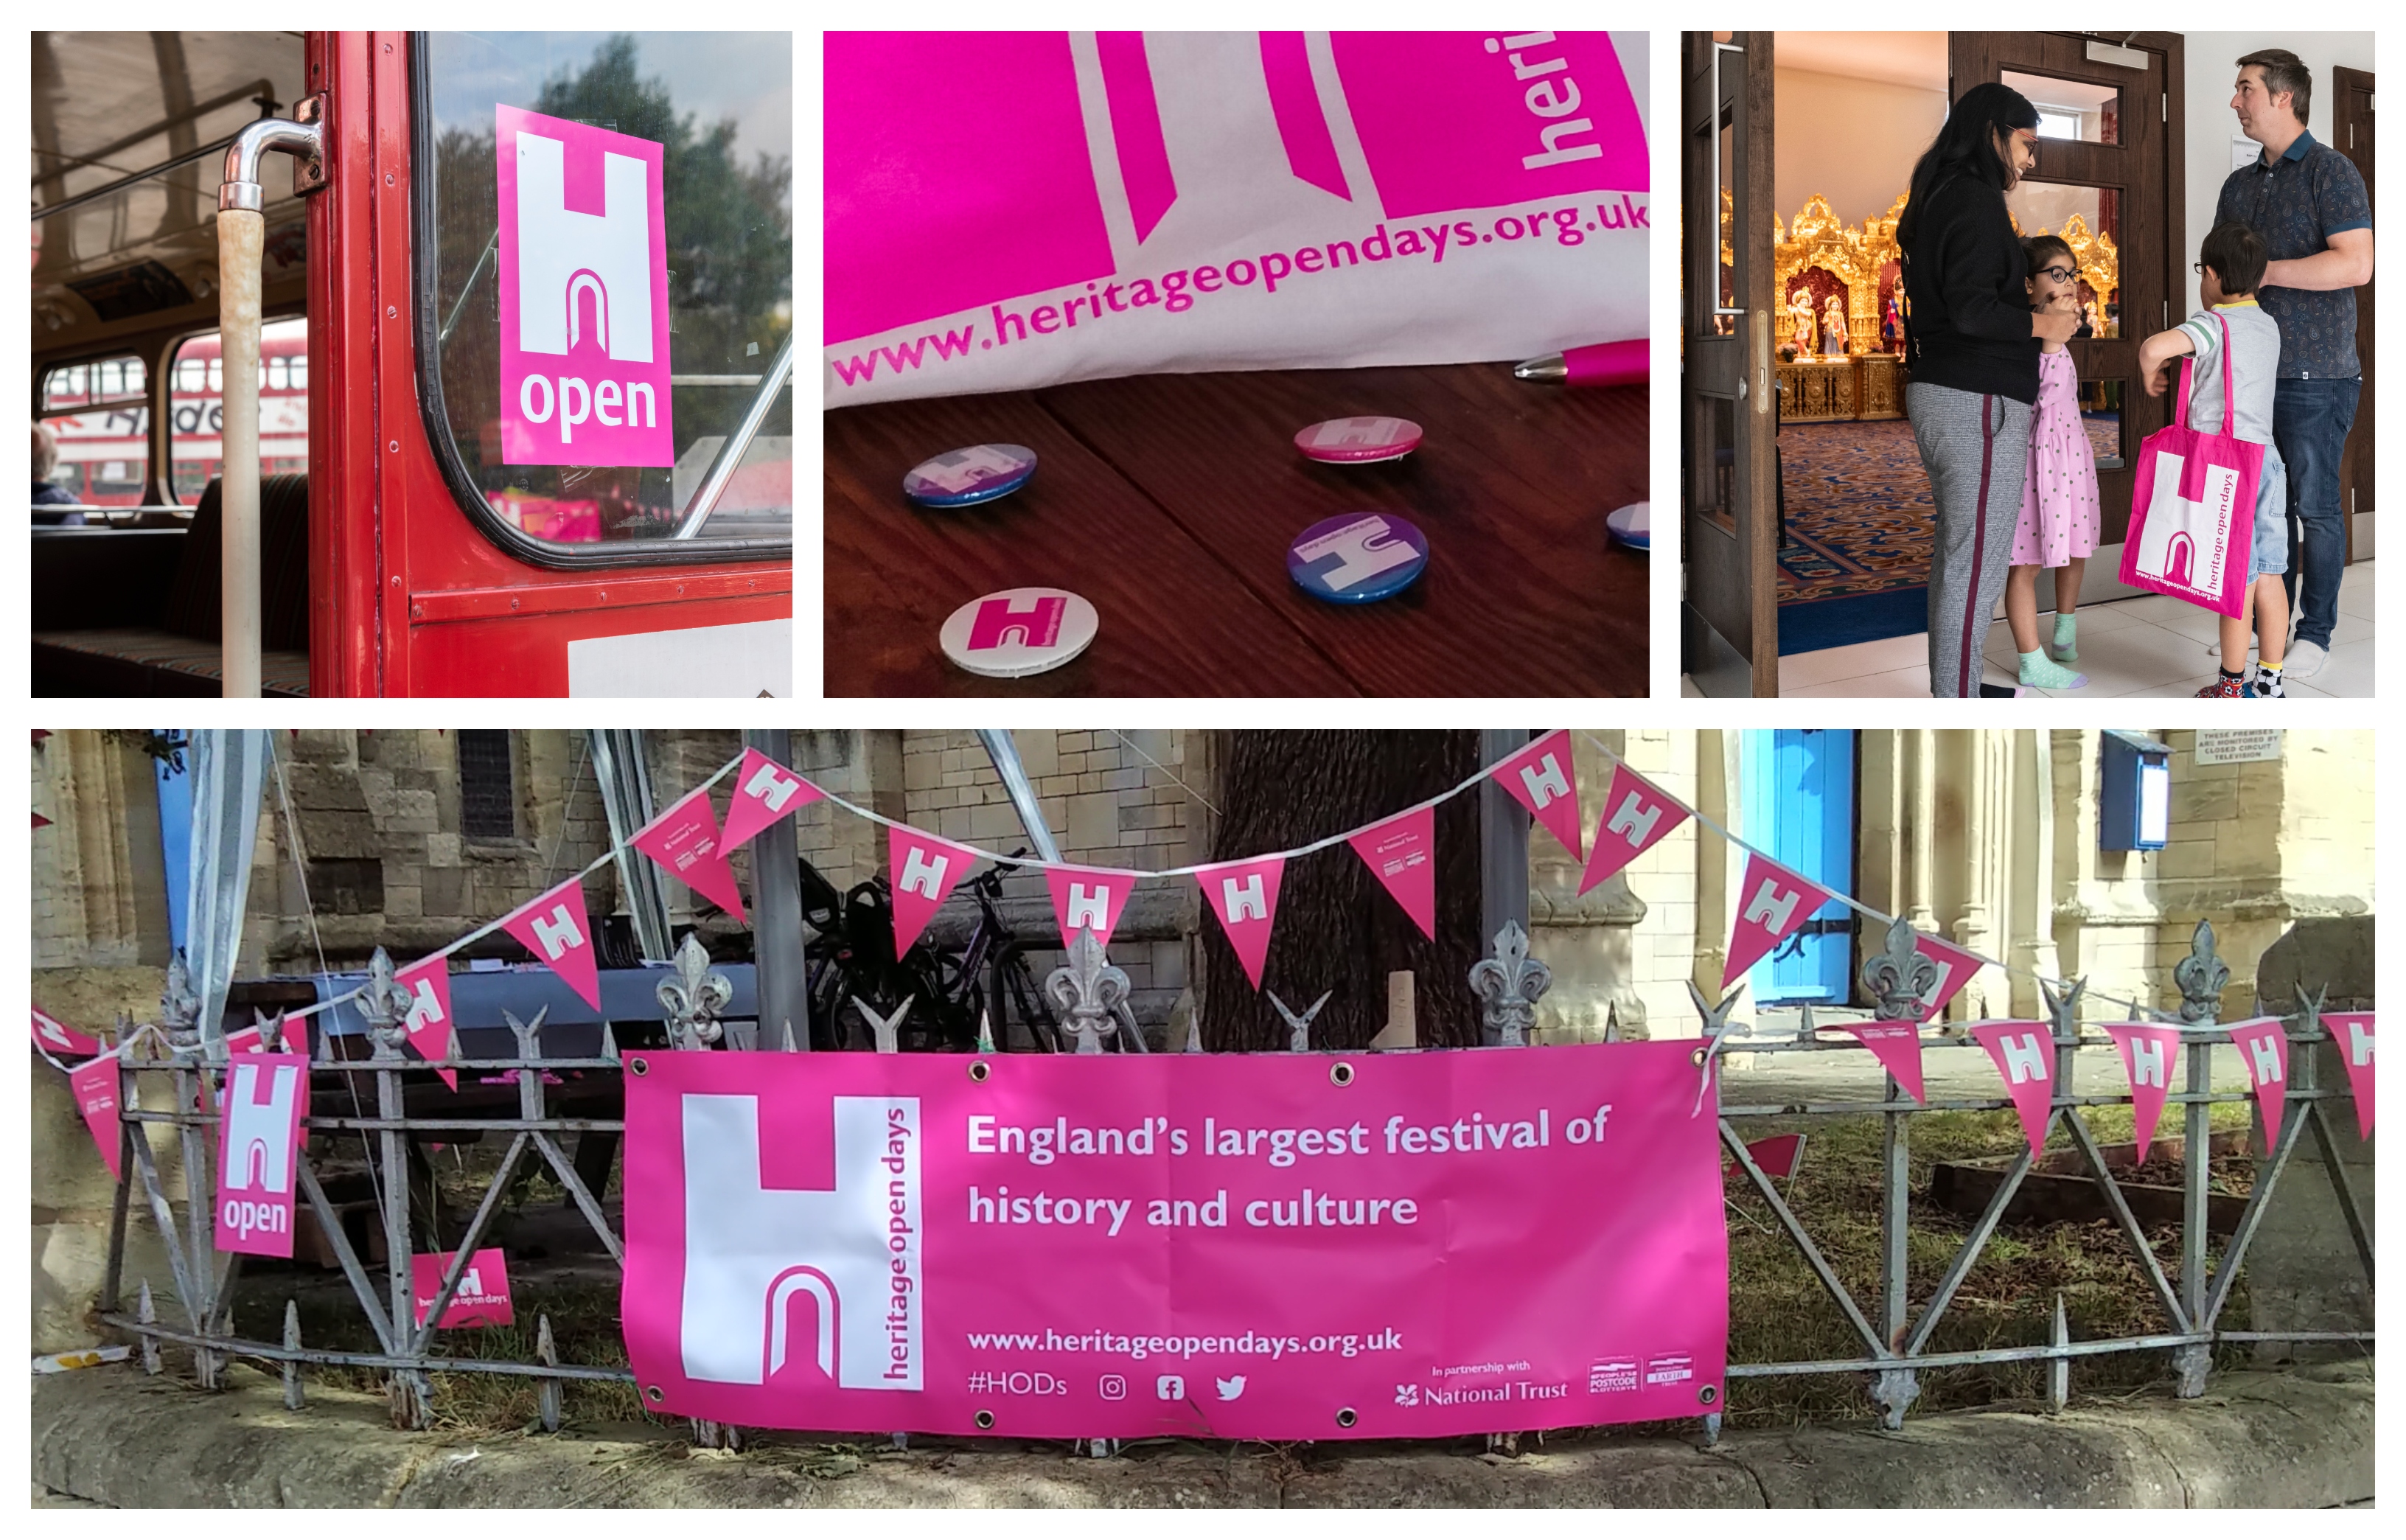 Mosaic of images showing bright pink banners, bunting, open signs, bags and badges in use at different events.